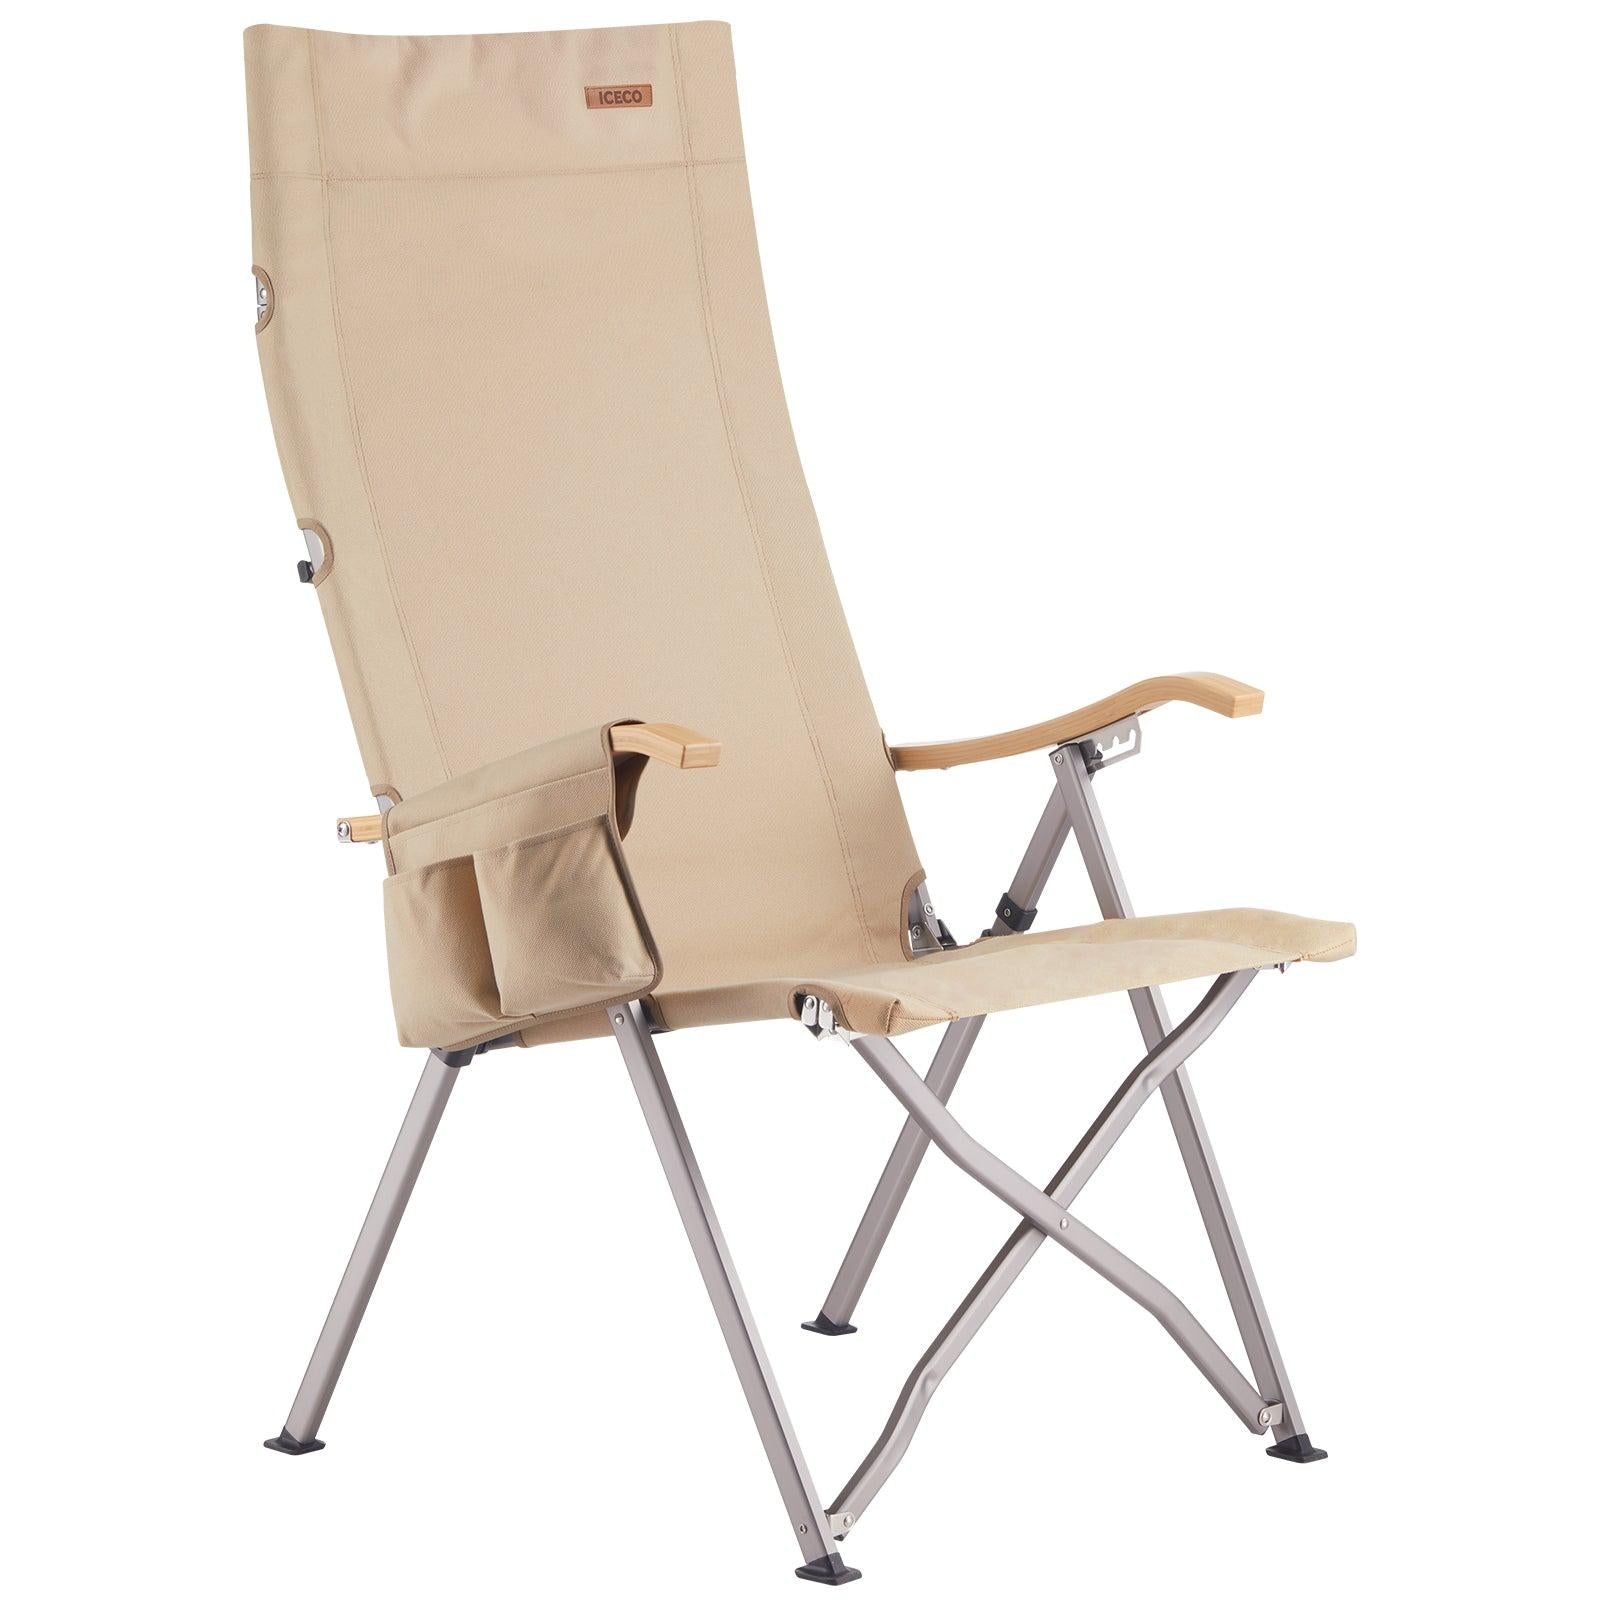 ICECO Ha1600 Adjustable Camping Chairs, High-Back Heavy Duty Folding ...